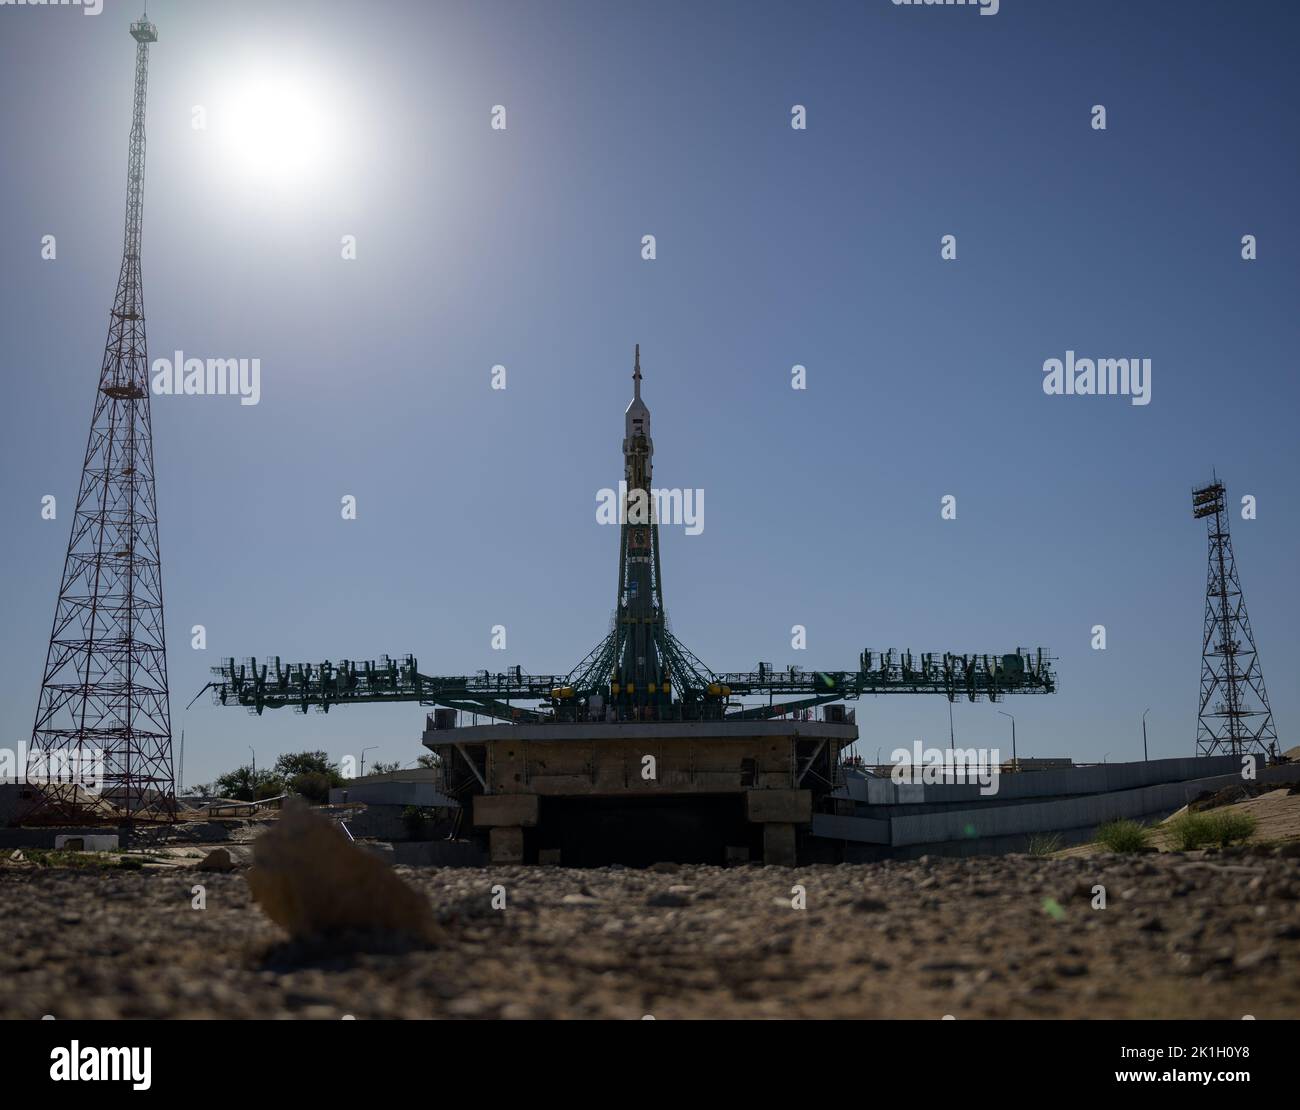 Baikonur , Kazakhstan. 18 September, 2022. The service gantry is closed around the Russian Soyuz MS-22 spacecraft and booster rocket at launch pad 31 of the Baikonur Cosmodrome, September 18, 2022 in Baikonur, Kazakhstan. International Space Station Expedition 68 crew members astronaut Frank Rubio of NASA, and cosmonauts Sergey Prokopyev and Dmitri Petelin of Roscosmos are set to launch September 21st to the orbiting laboratory.  Credit: Bill Ingalls/NASA/Alamy Live News Stock Photo